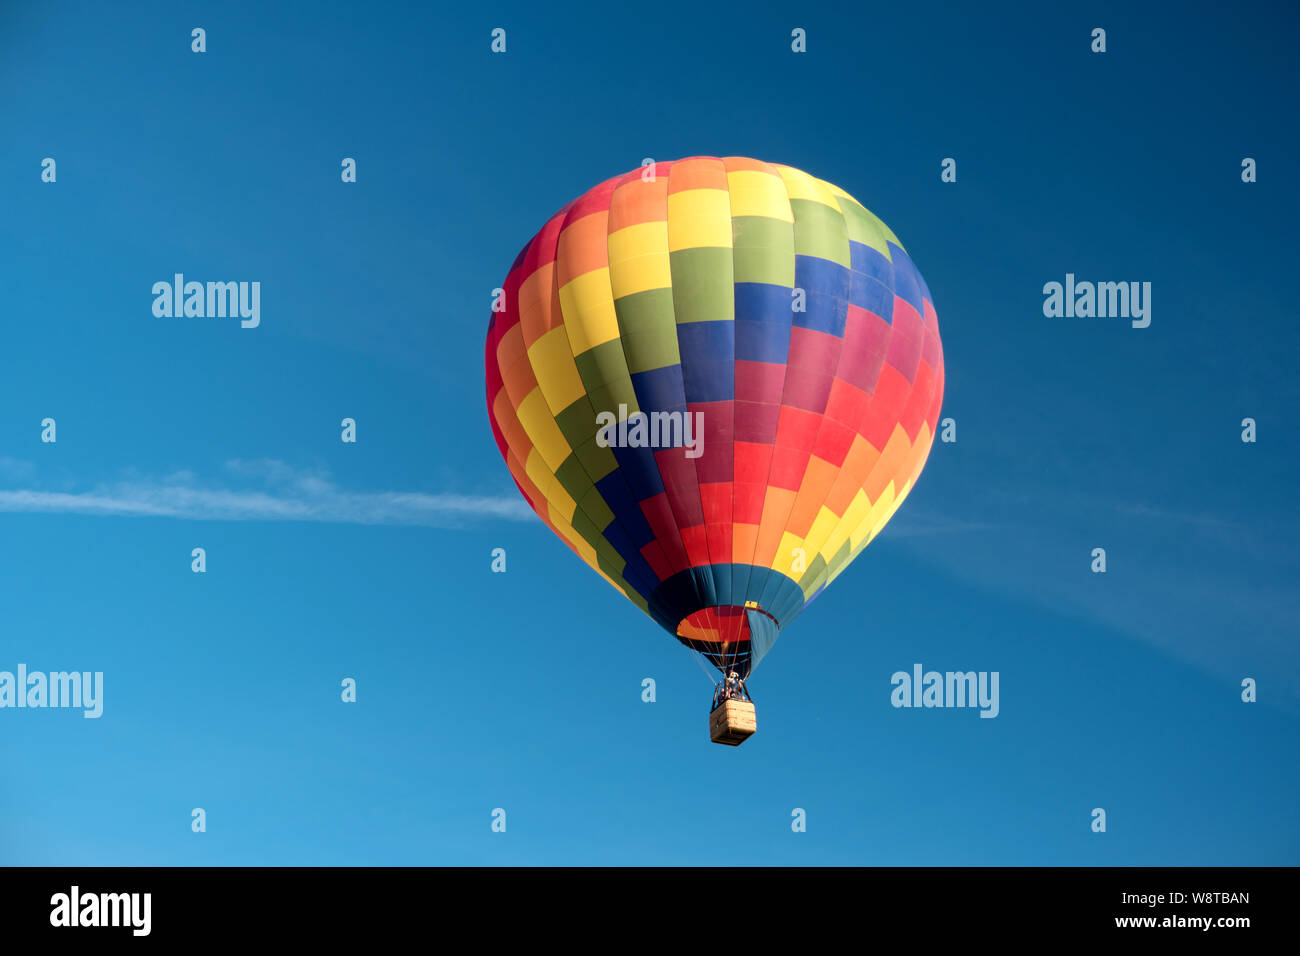 Detail of a starting colorful hot air balloon Stock Photo